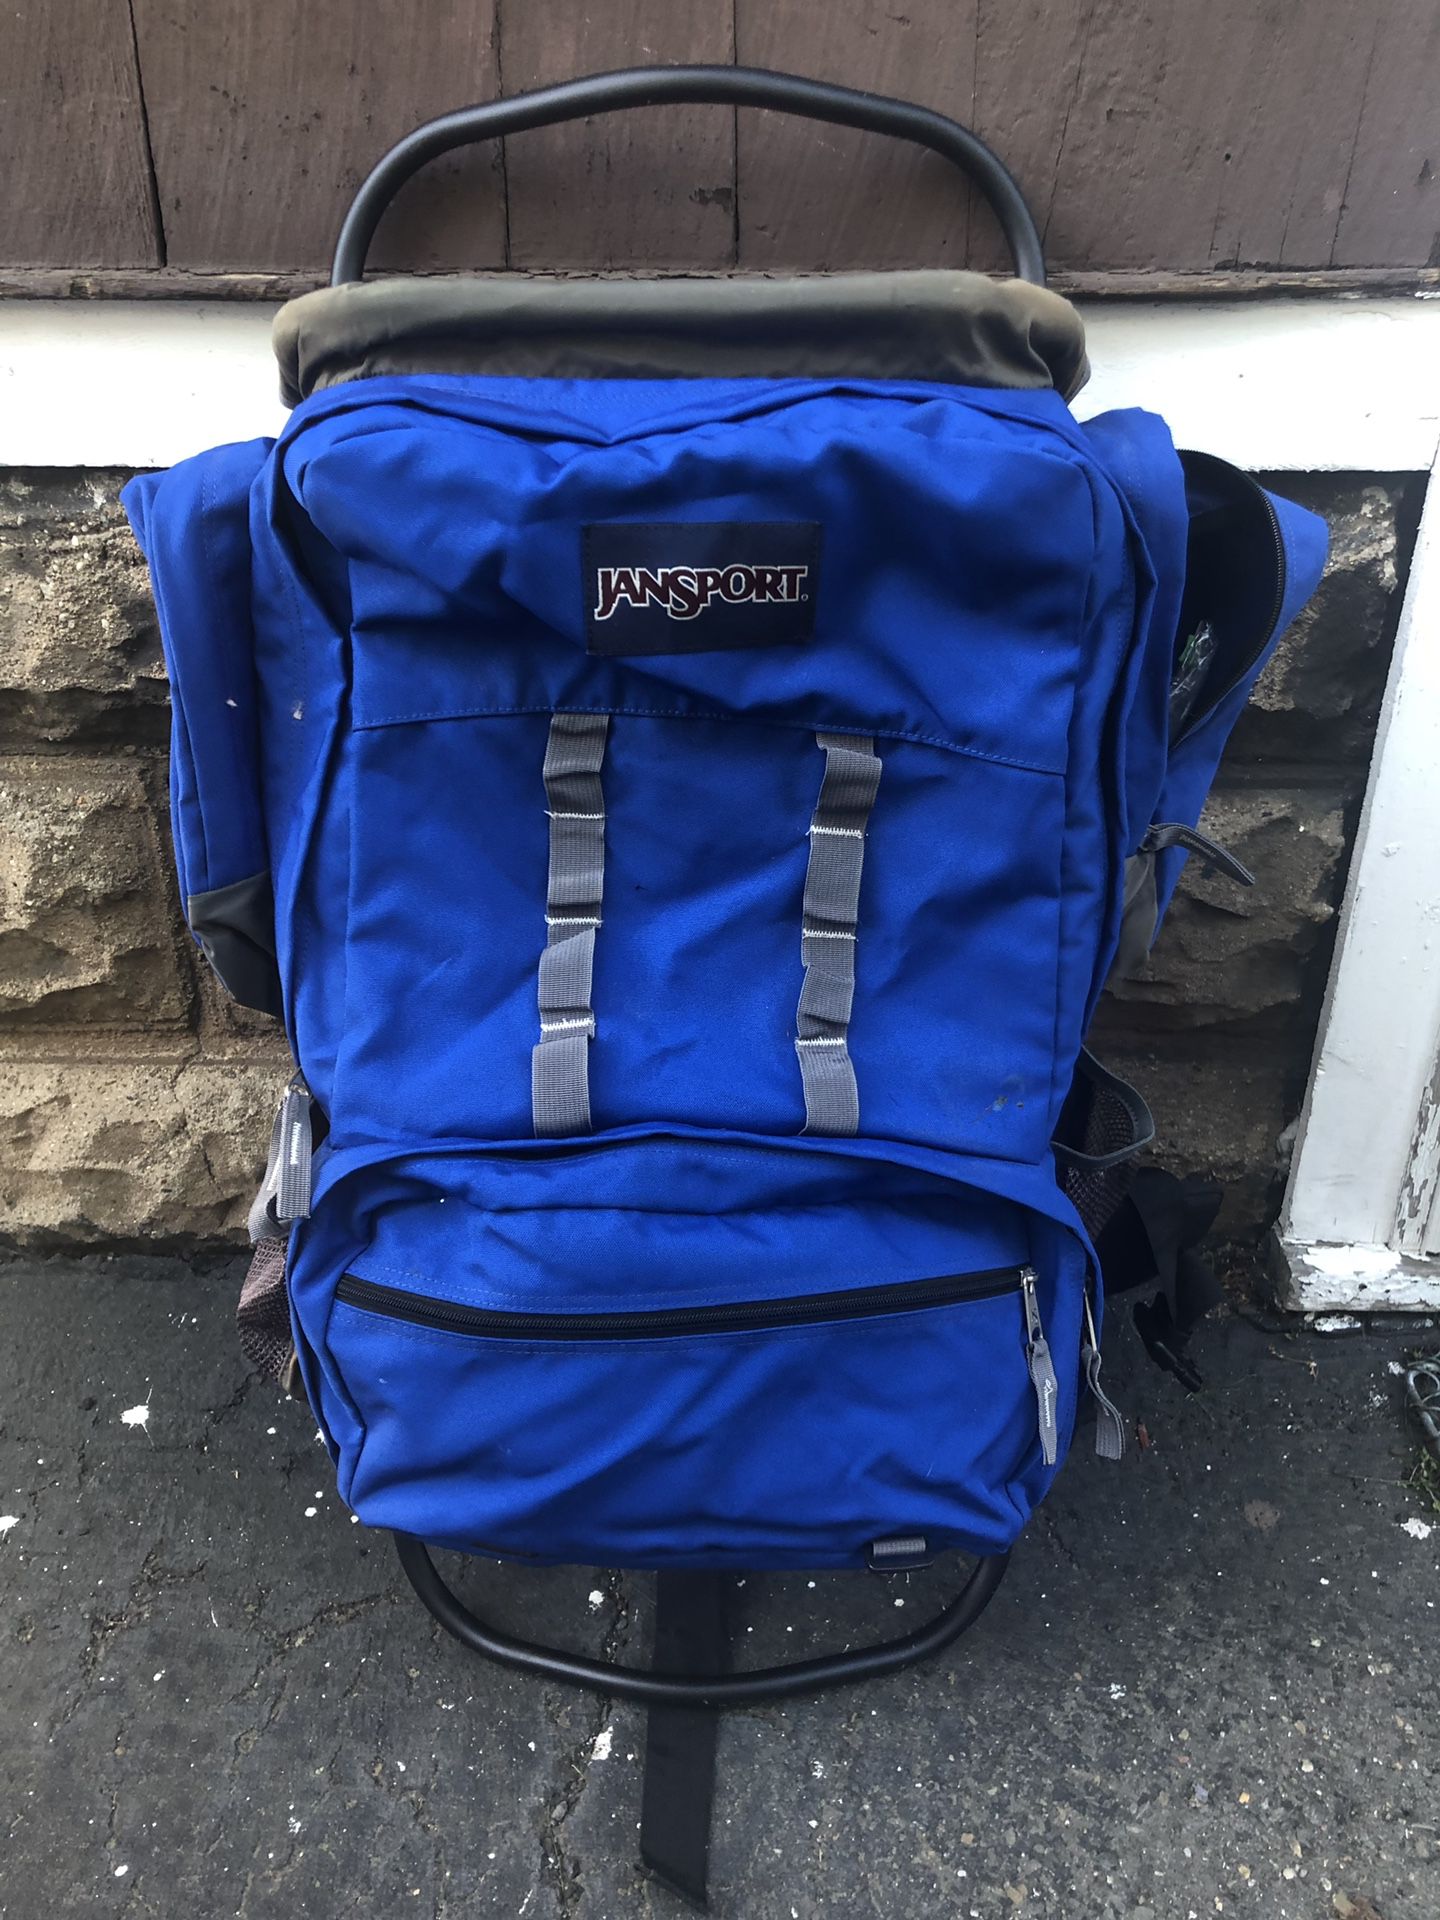 Jansport Camping Backpack - Price reduced!!